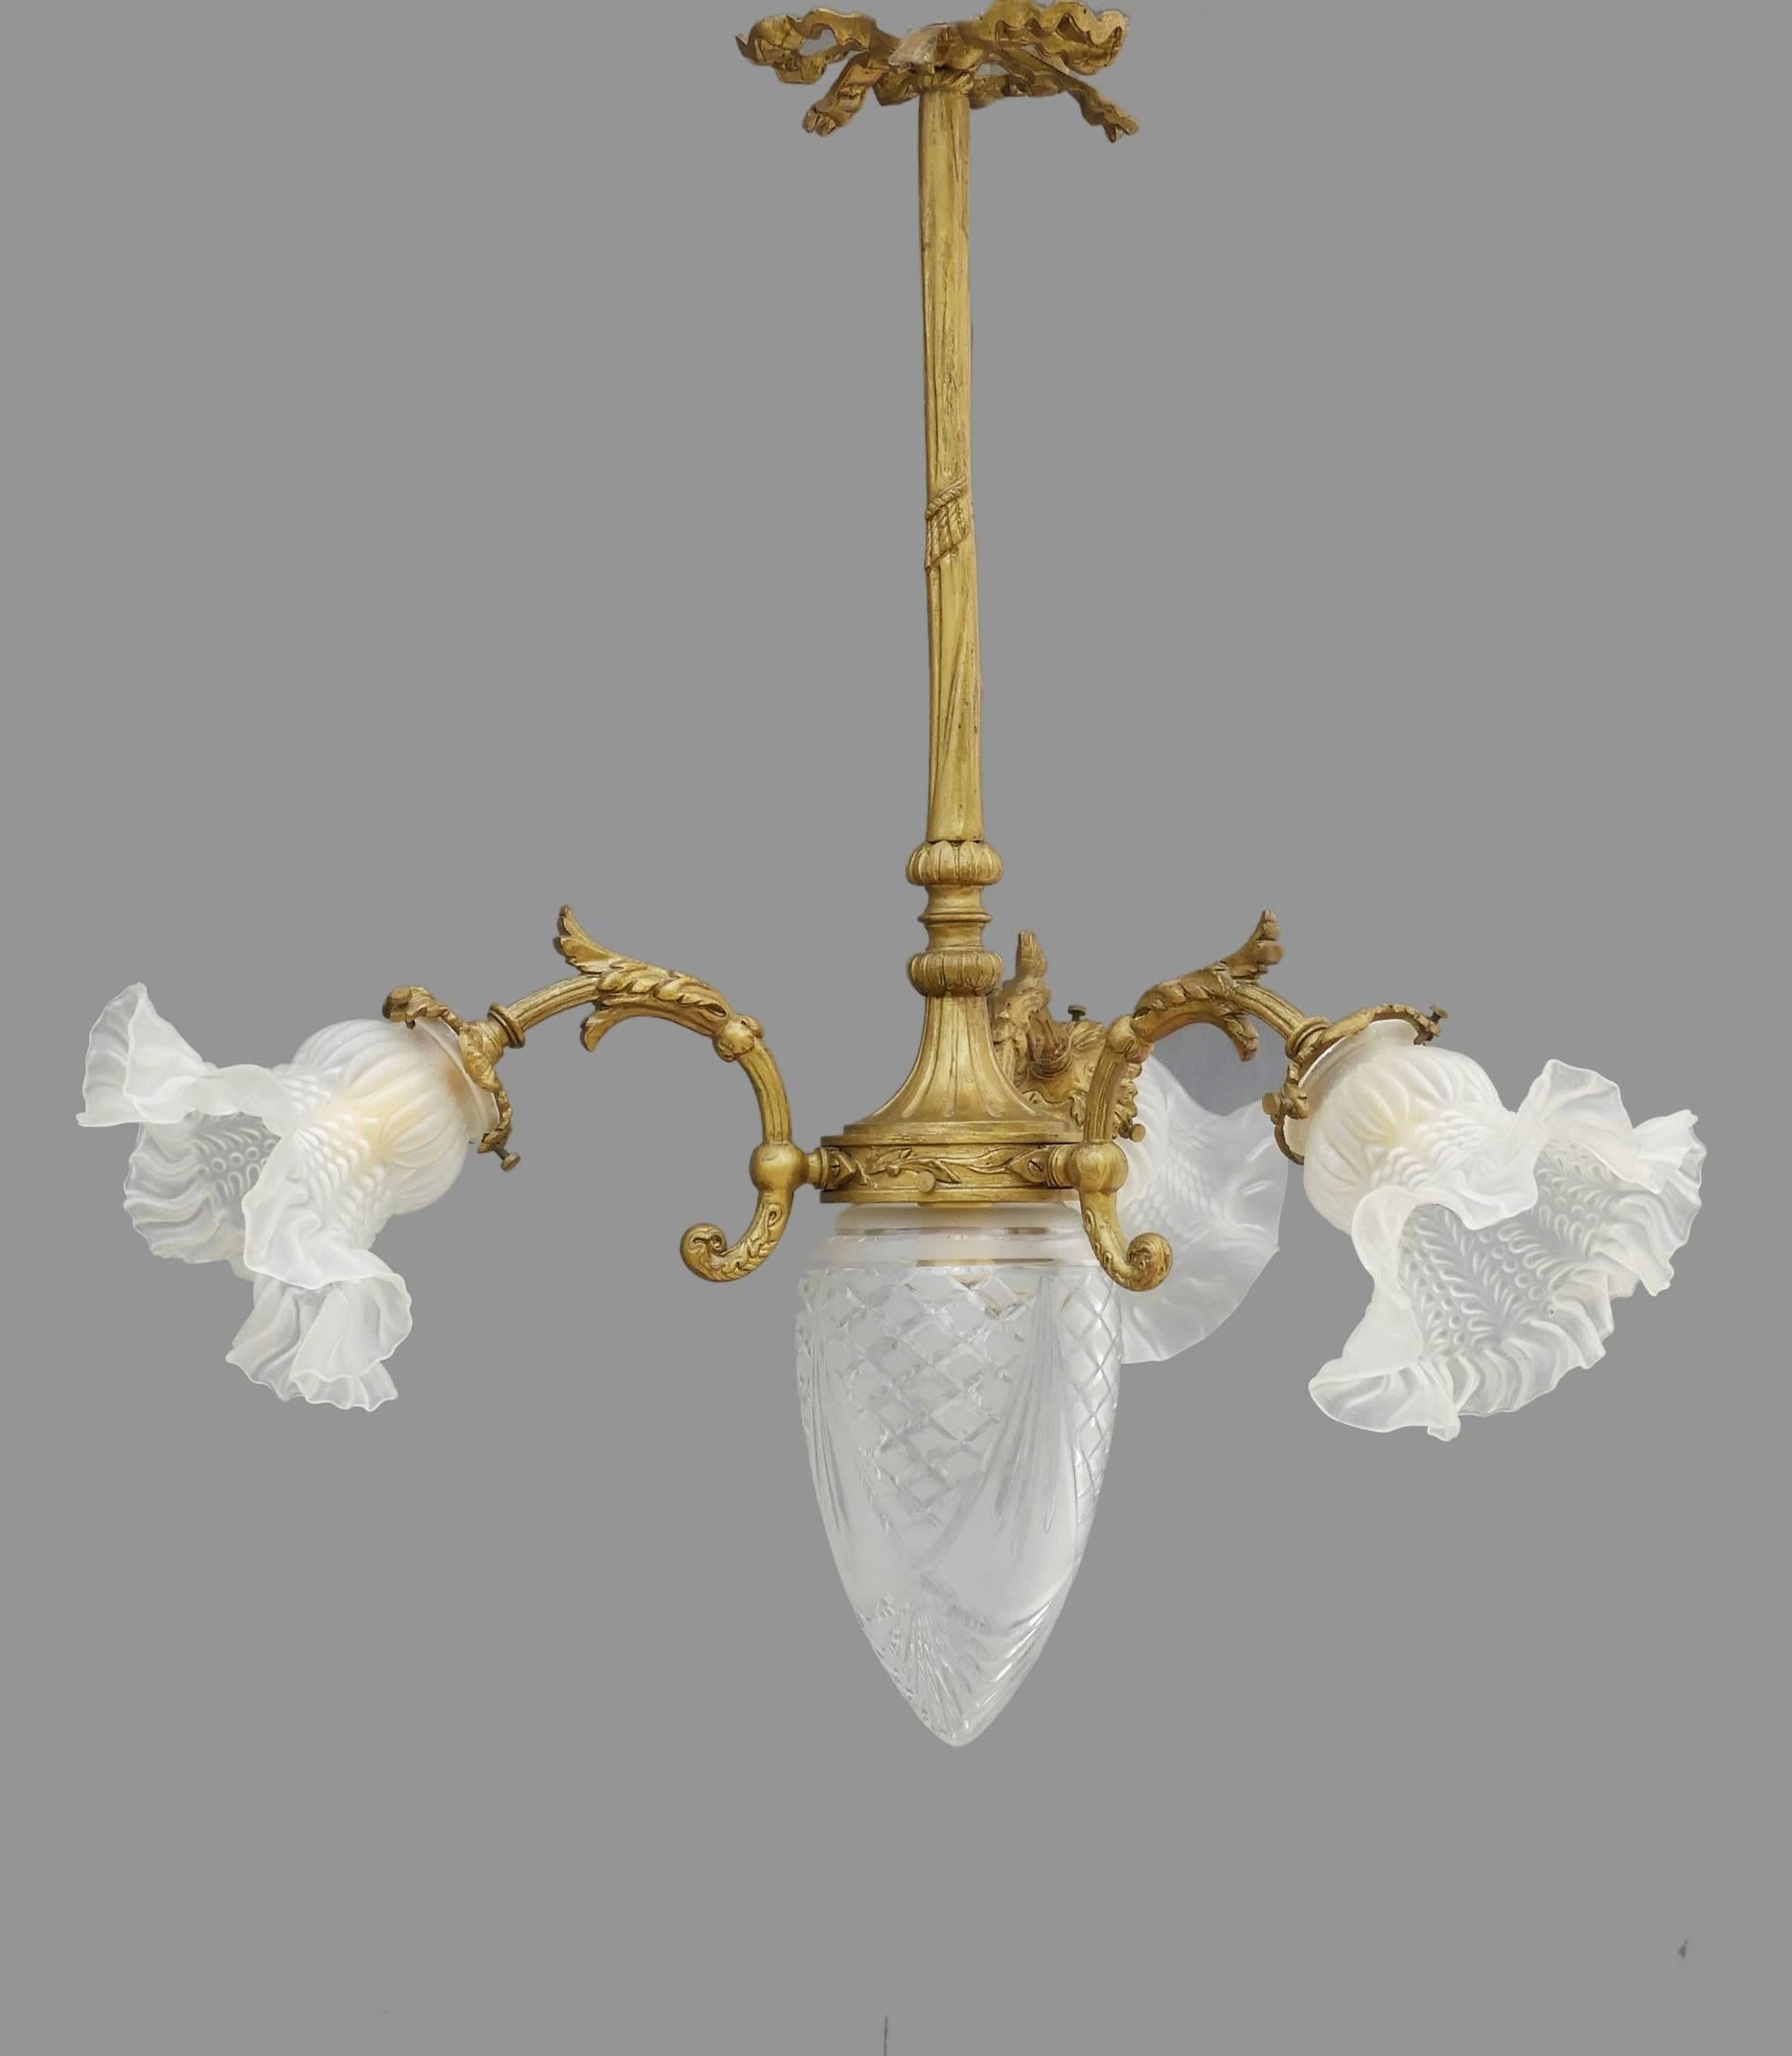 French chandelier, circa 1900, Belle Époque
Ornate gilt bronze light, three stems with frosted glass frilled tulip shades surrounding a central etched glass 'pomme de pin'
In good original condition with no losses to glass
Drop can be lengthened